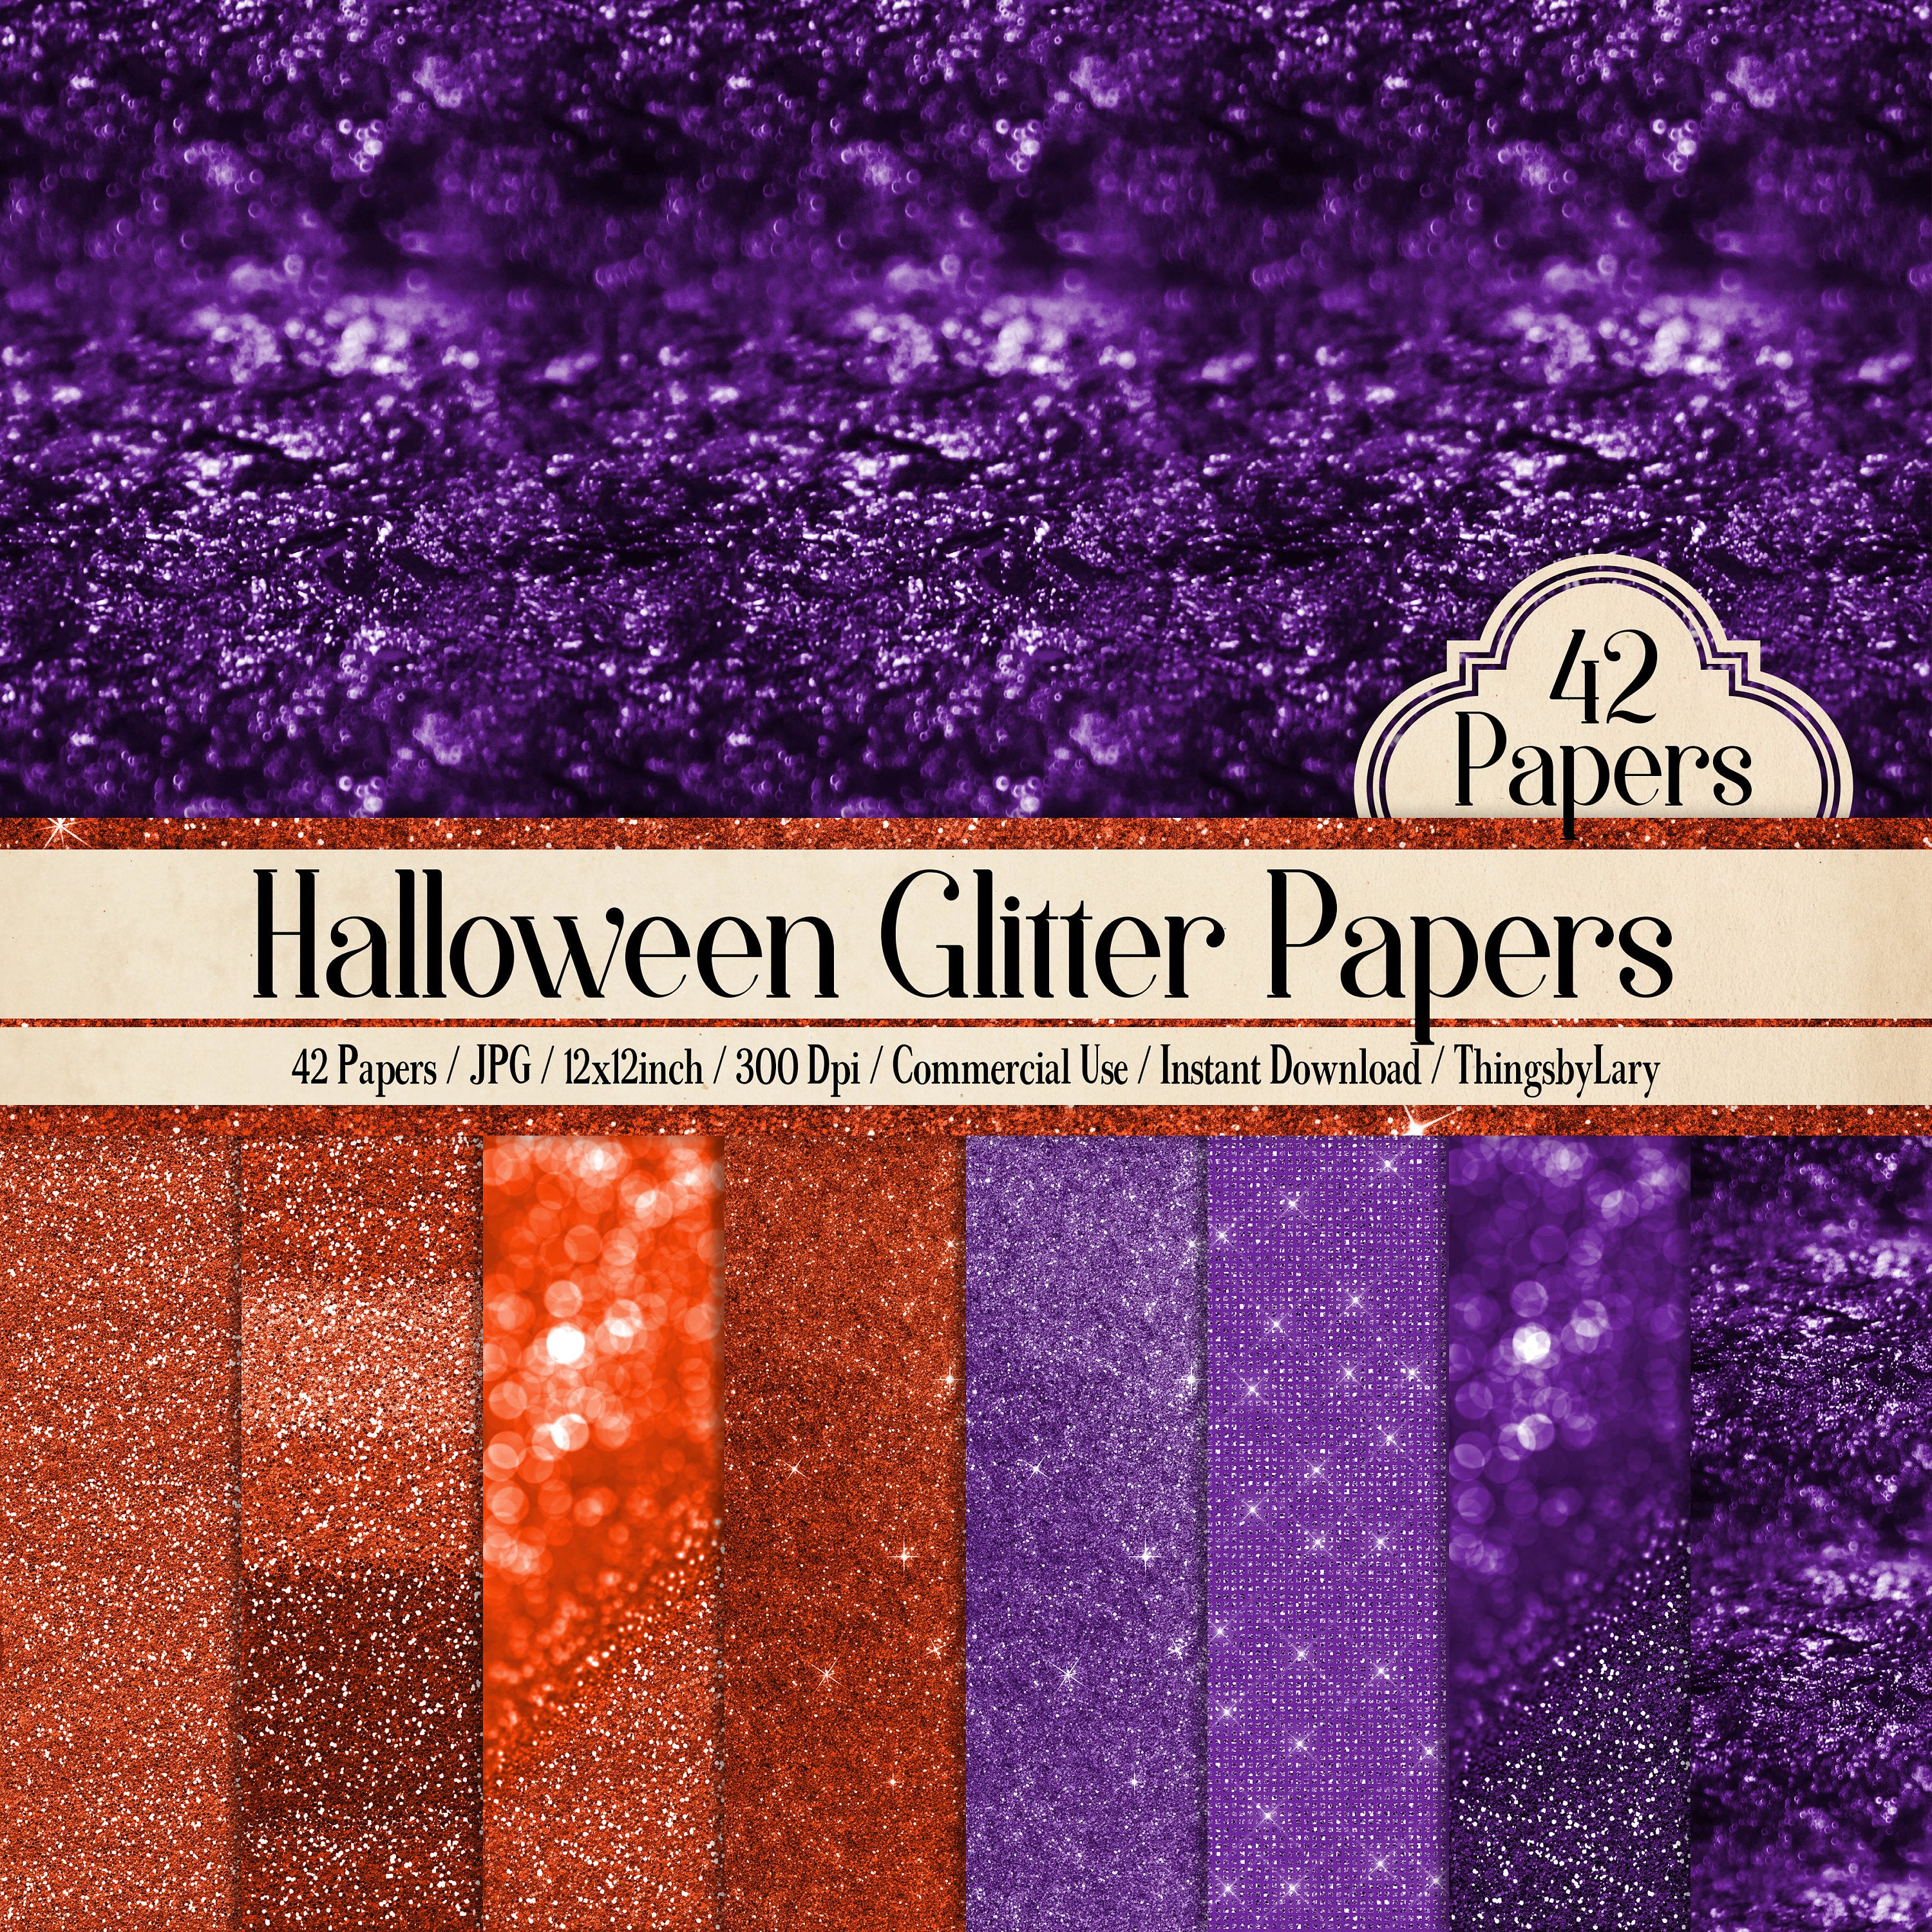 42 Halloween Glitter Papers 12 inch, 300 Dpi Planner Paper, Commercial Use, Scrapbook Paper, Glitter, Luxury Digital Paper